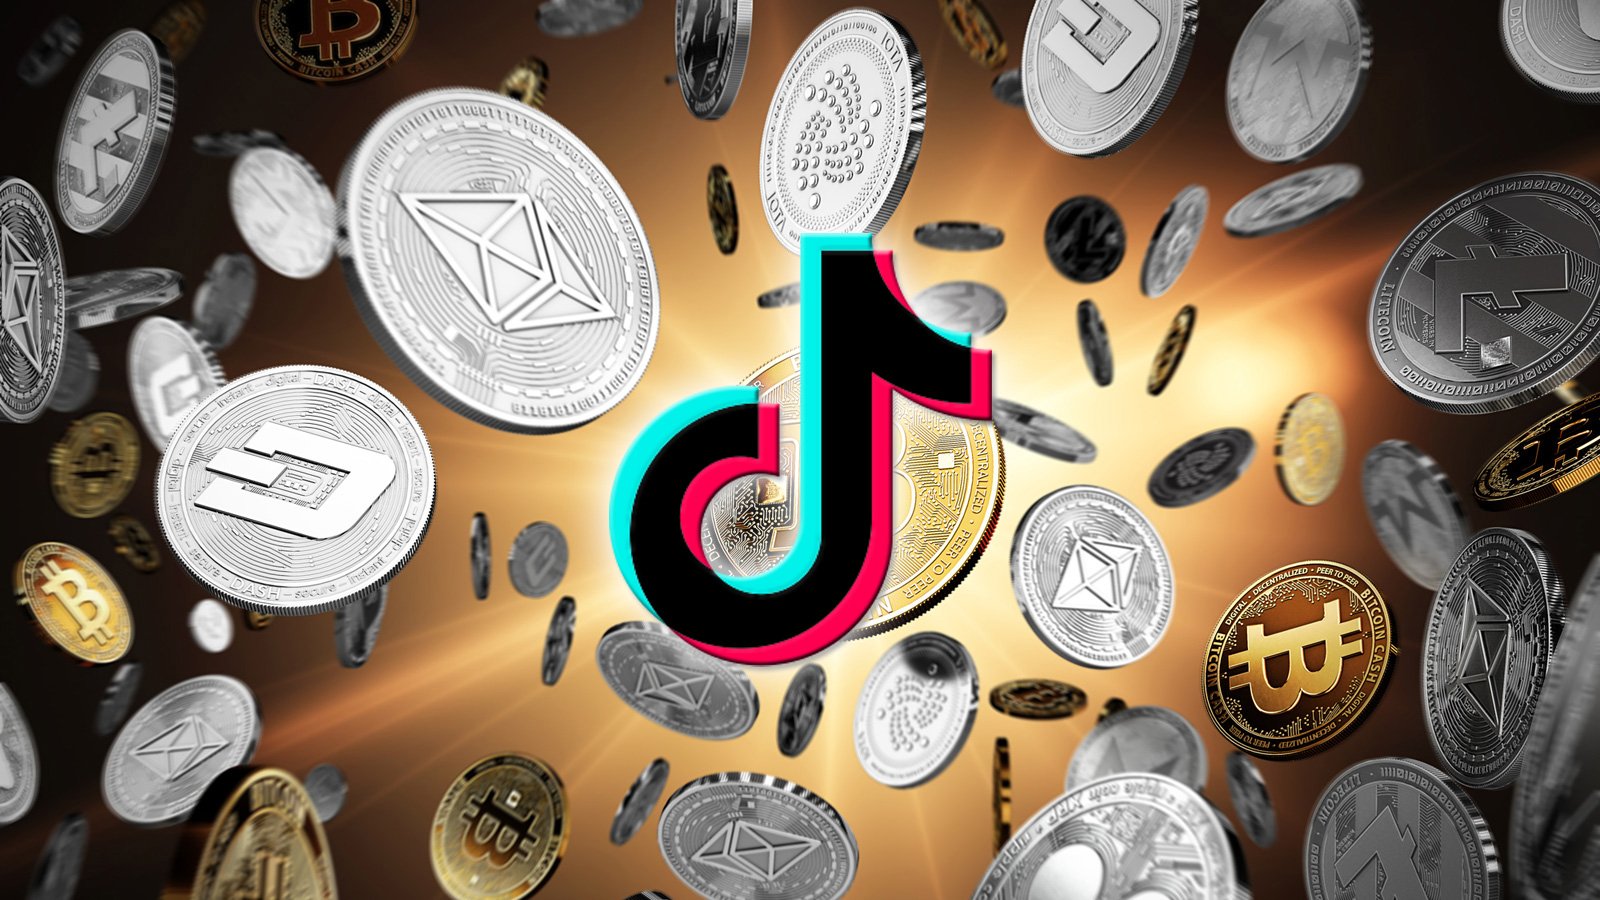 TikTok flooded by ‘Elon Musk’ cryptocurrency giveaway scams – Source: www.bleepingcomputer.com